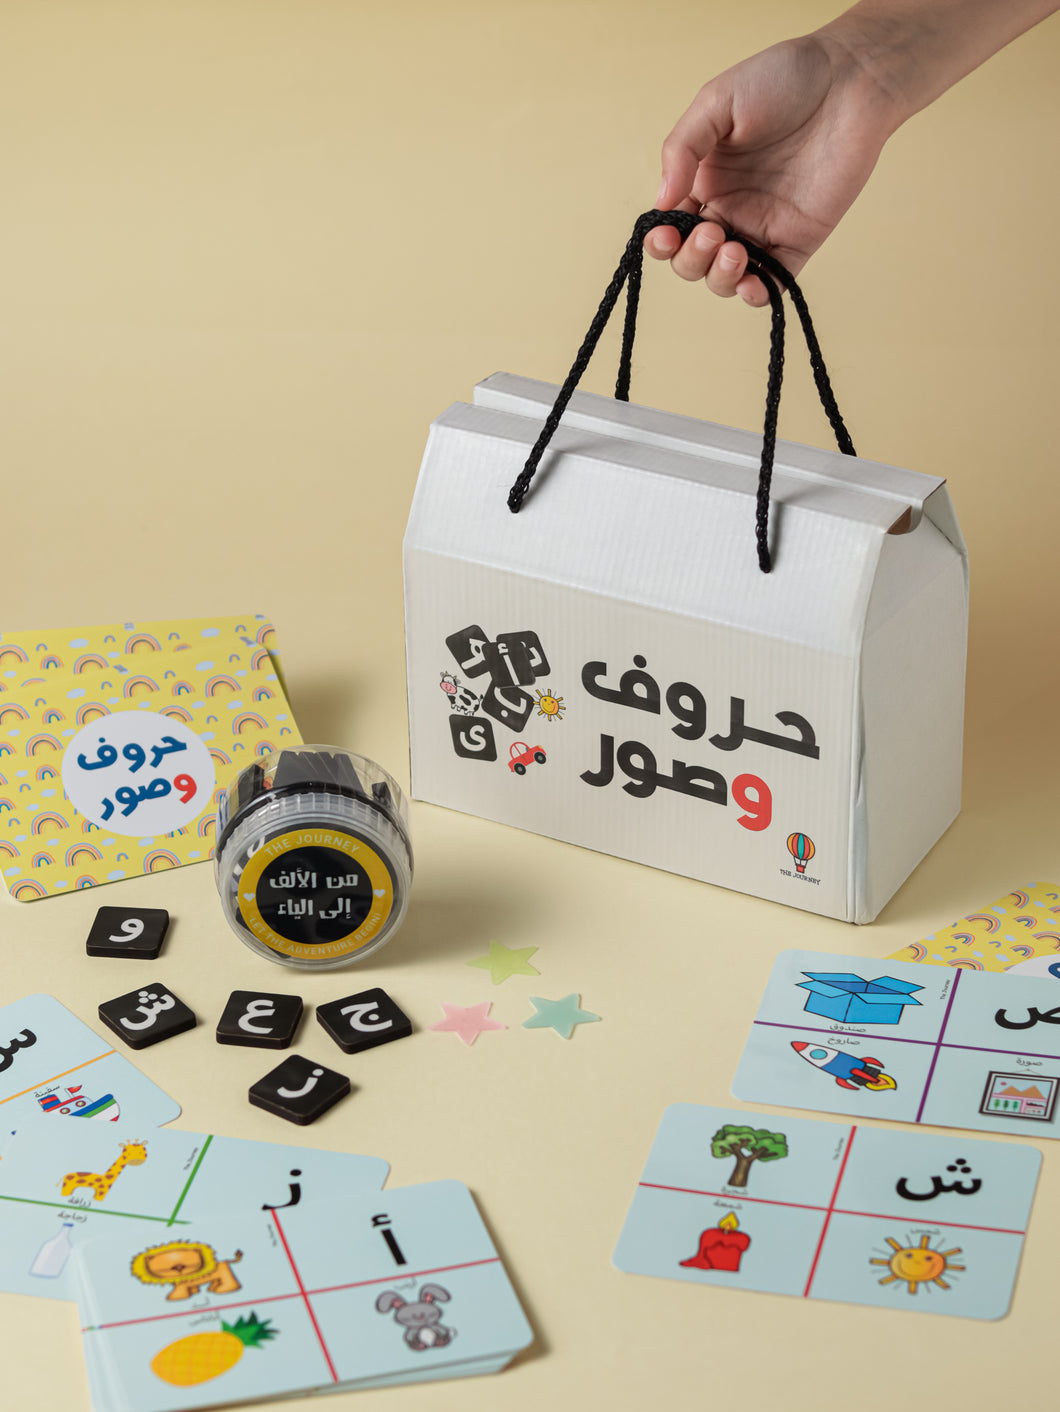 Arabic 3 Picture Phonics Cards with Wooden Letters - (مجموعة حروف وصور)